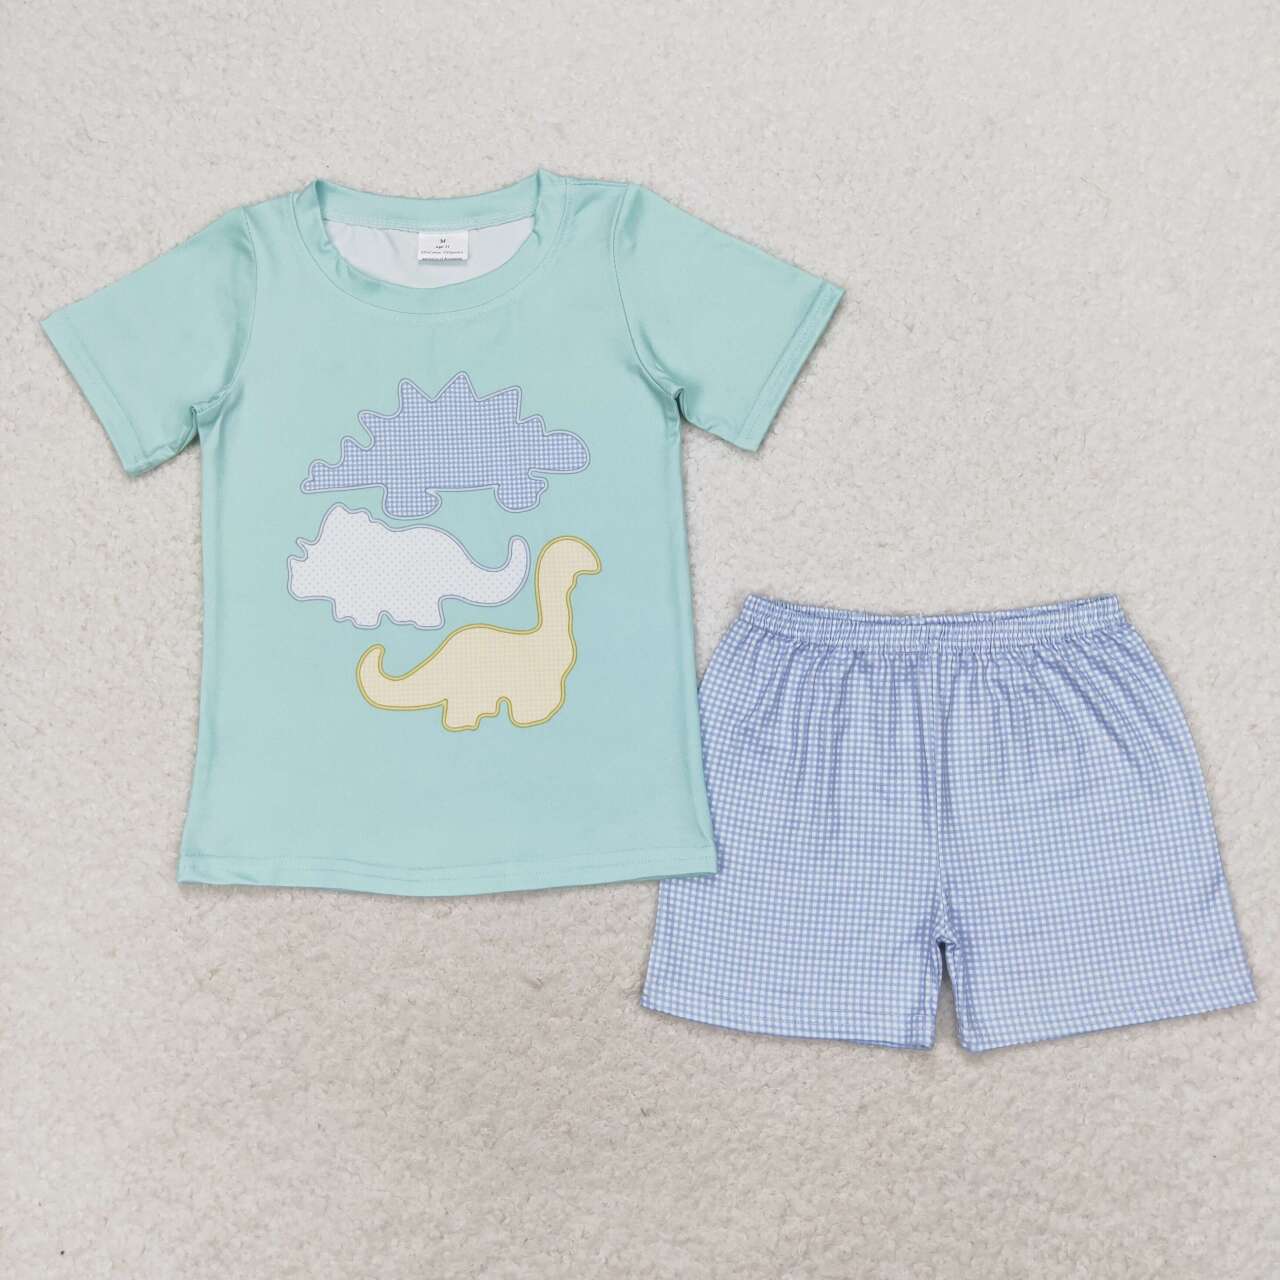 BSSO0920 Dinosaur teal short-sleeved plaid shorts suit